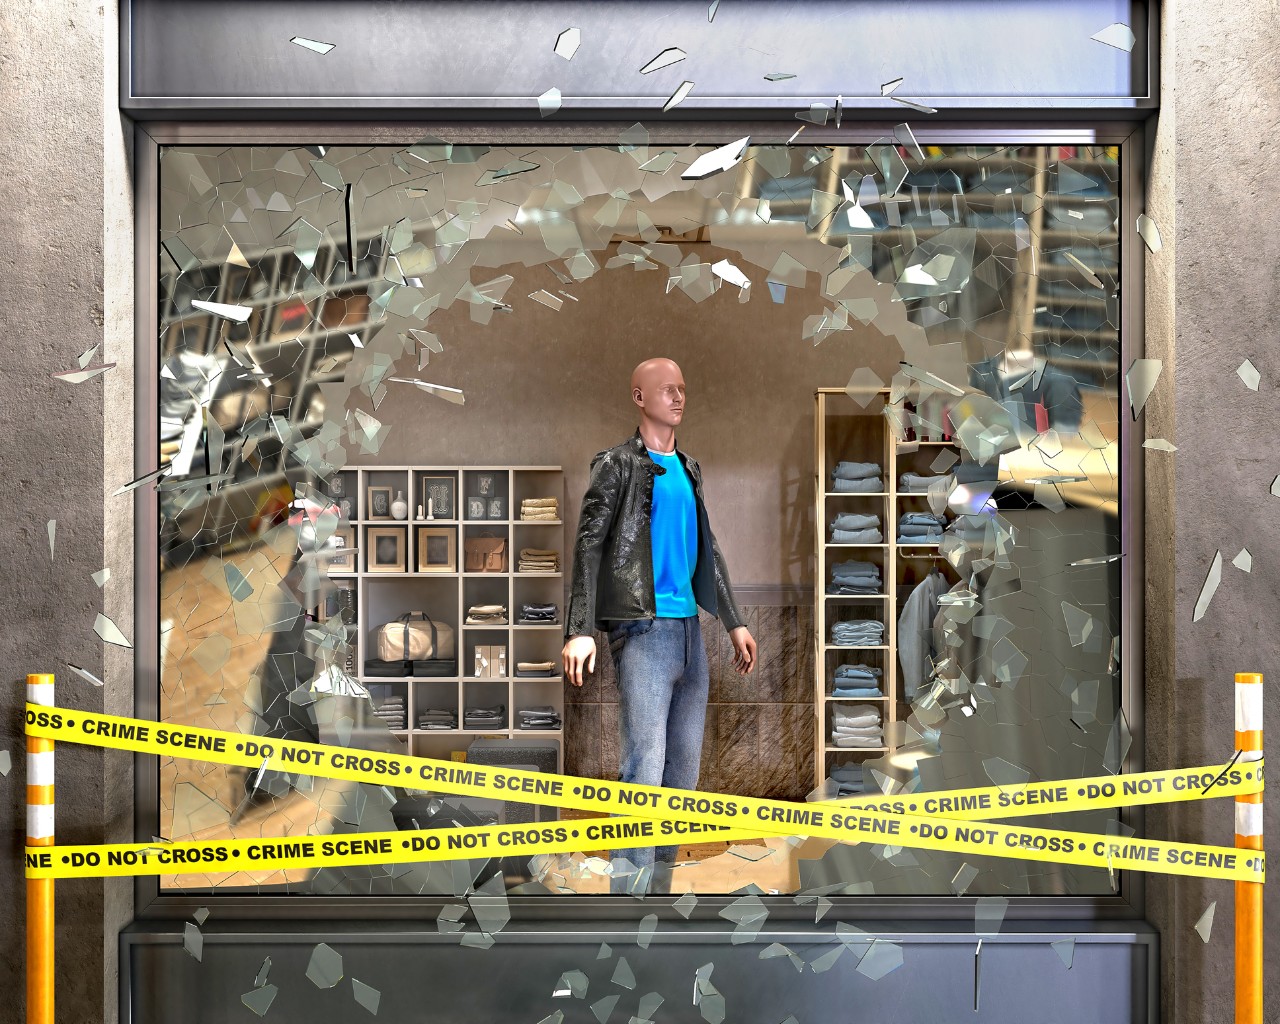 window smashed at a retail store